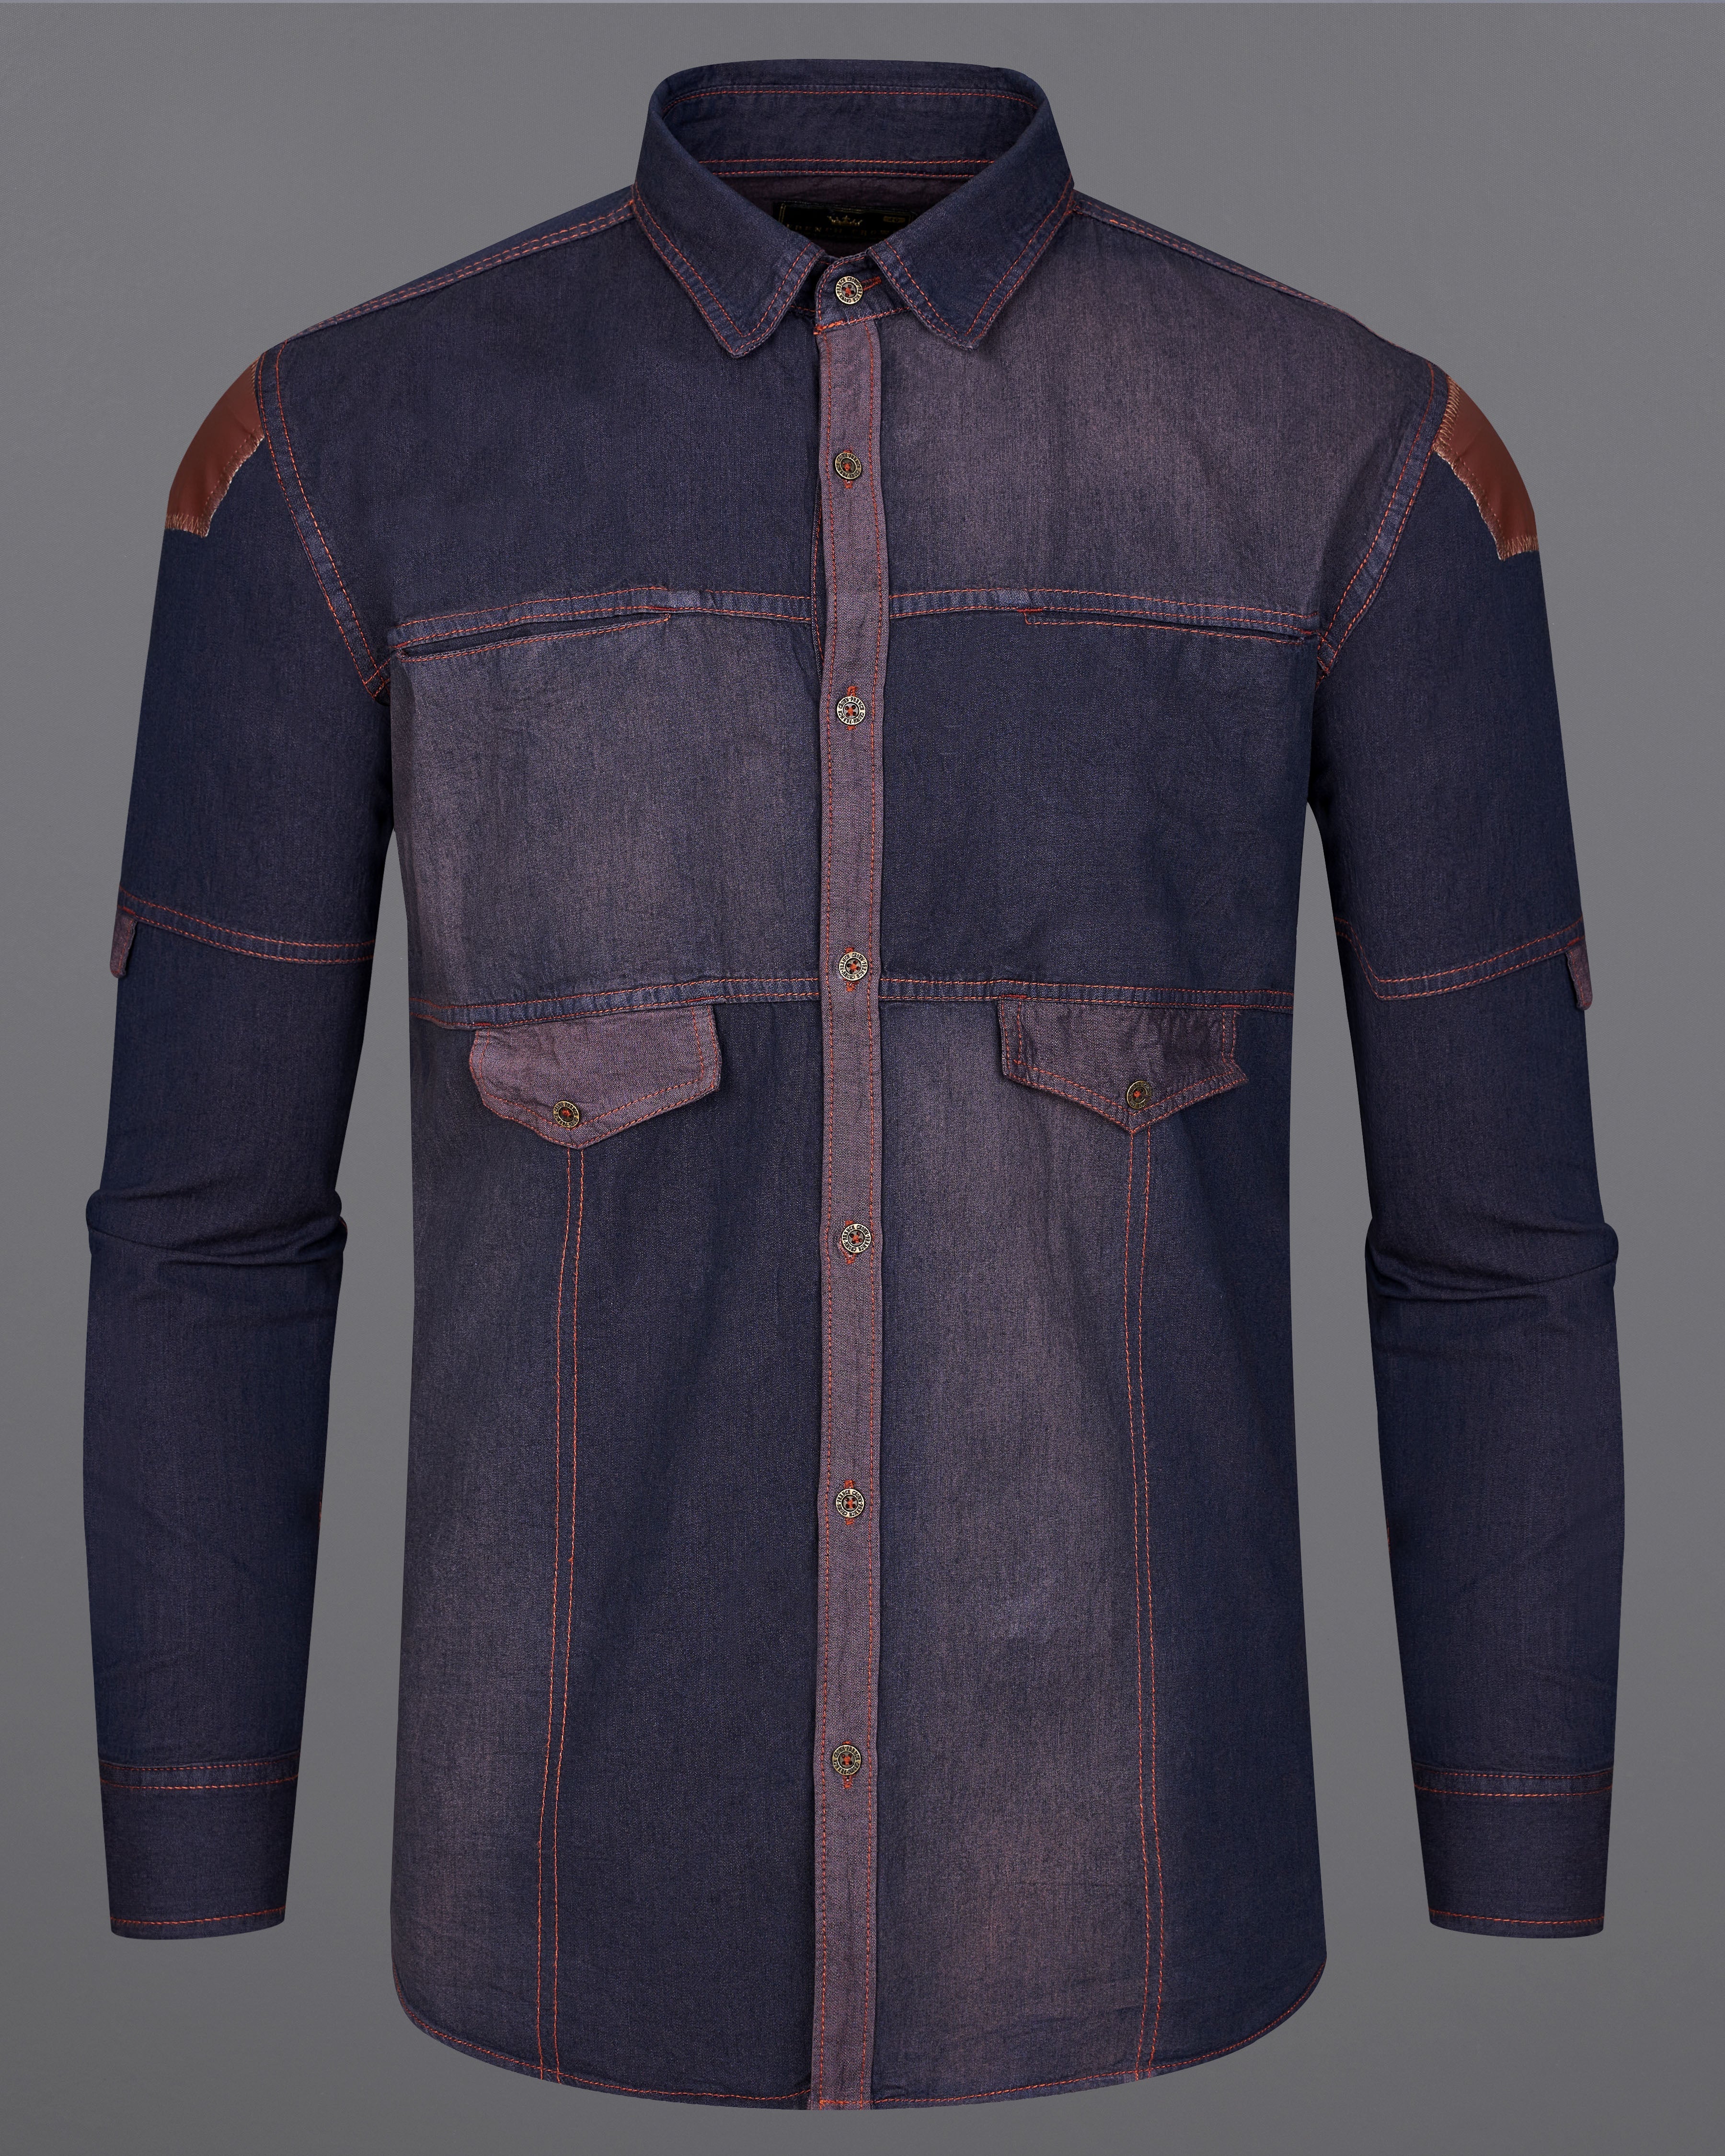 Gravel Purple with Baltic Sea Denim Shirt With Leather Patch Work 9201-MB-38,9201-MB-H-38,9201-MB-39,9201-MB-H-39,9201-MB-40,9201-MB-H-40,9201-MB-42,9201-MB-H-42,9201-MB-44,9201-MB-H-44,9201-MB-46,9201-MB-H-46,9201-MB-48,9201-MB-H-48,9201-MB-50,9201-MB-H-50,9201-MB-52,9201-MB-H-52